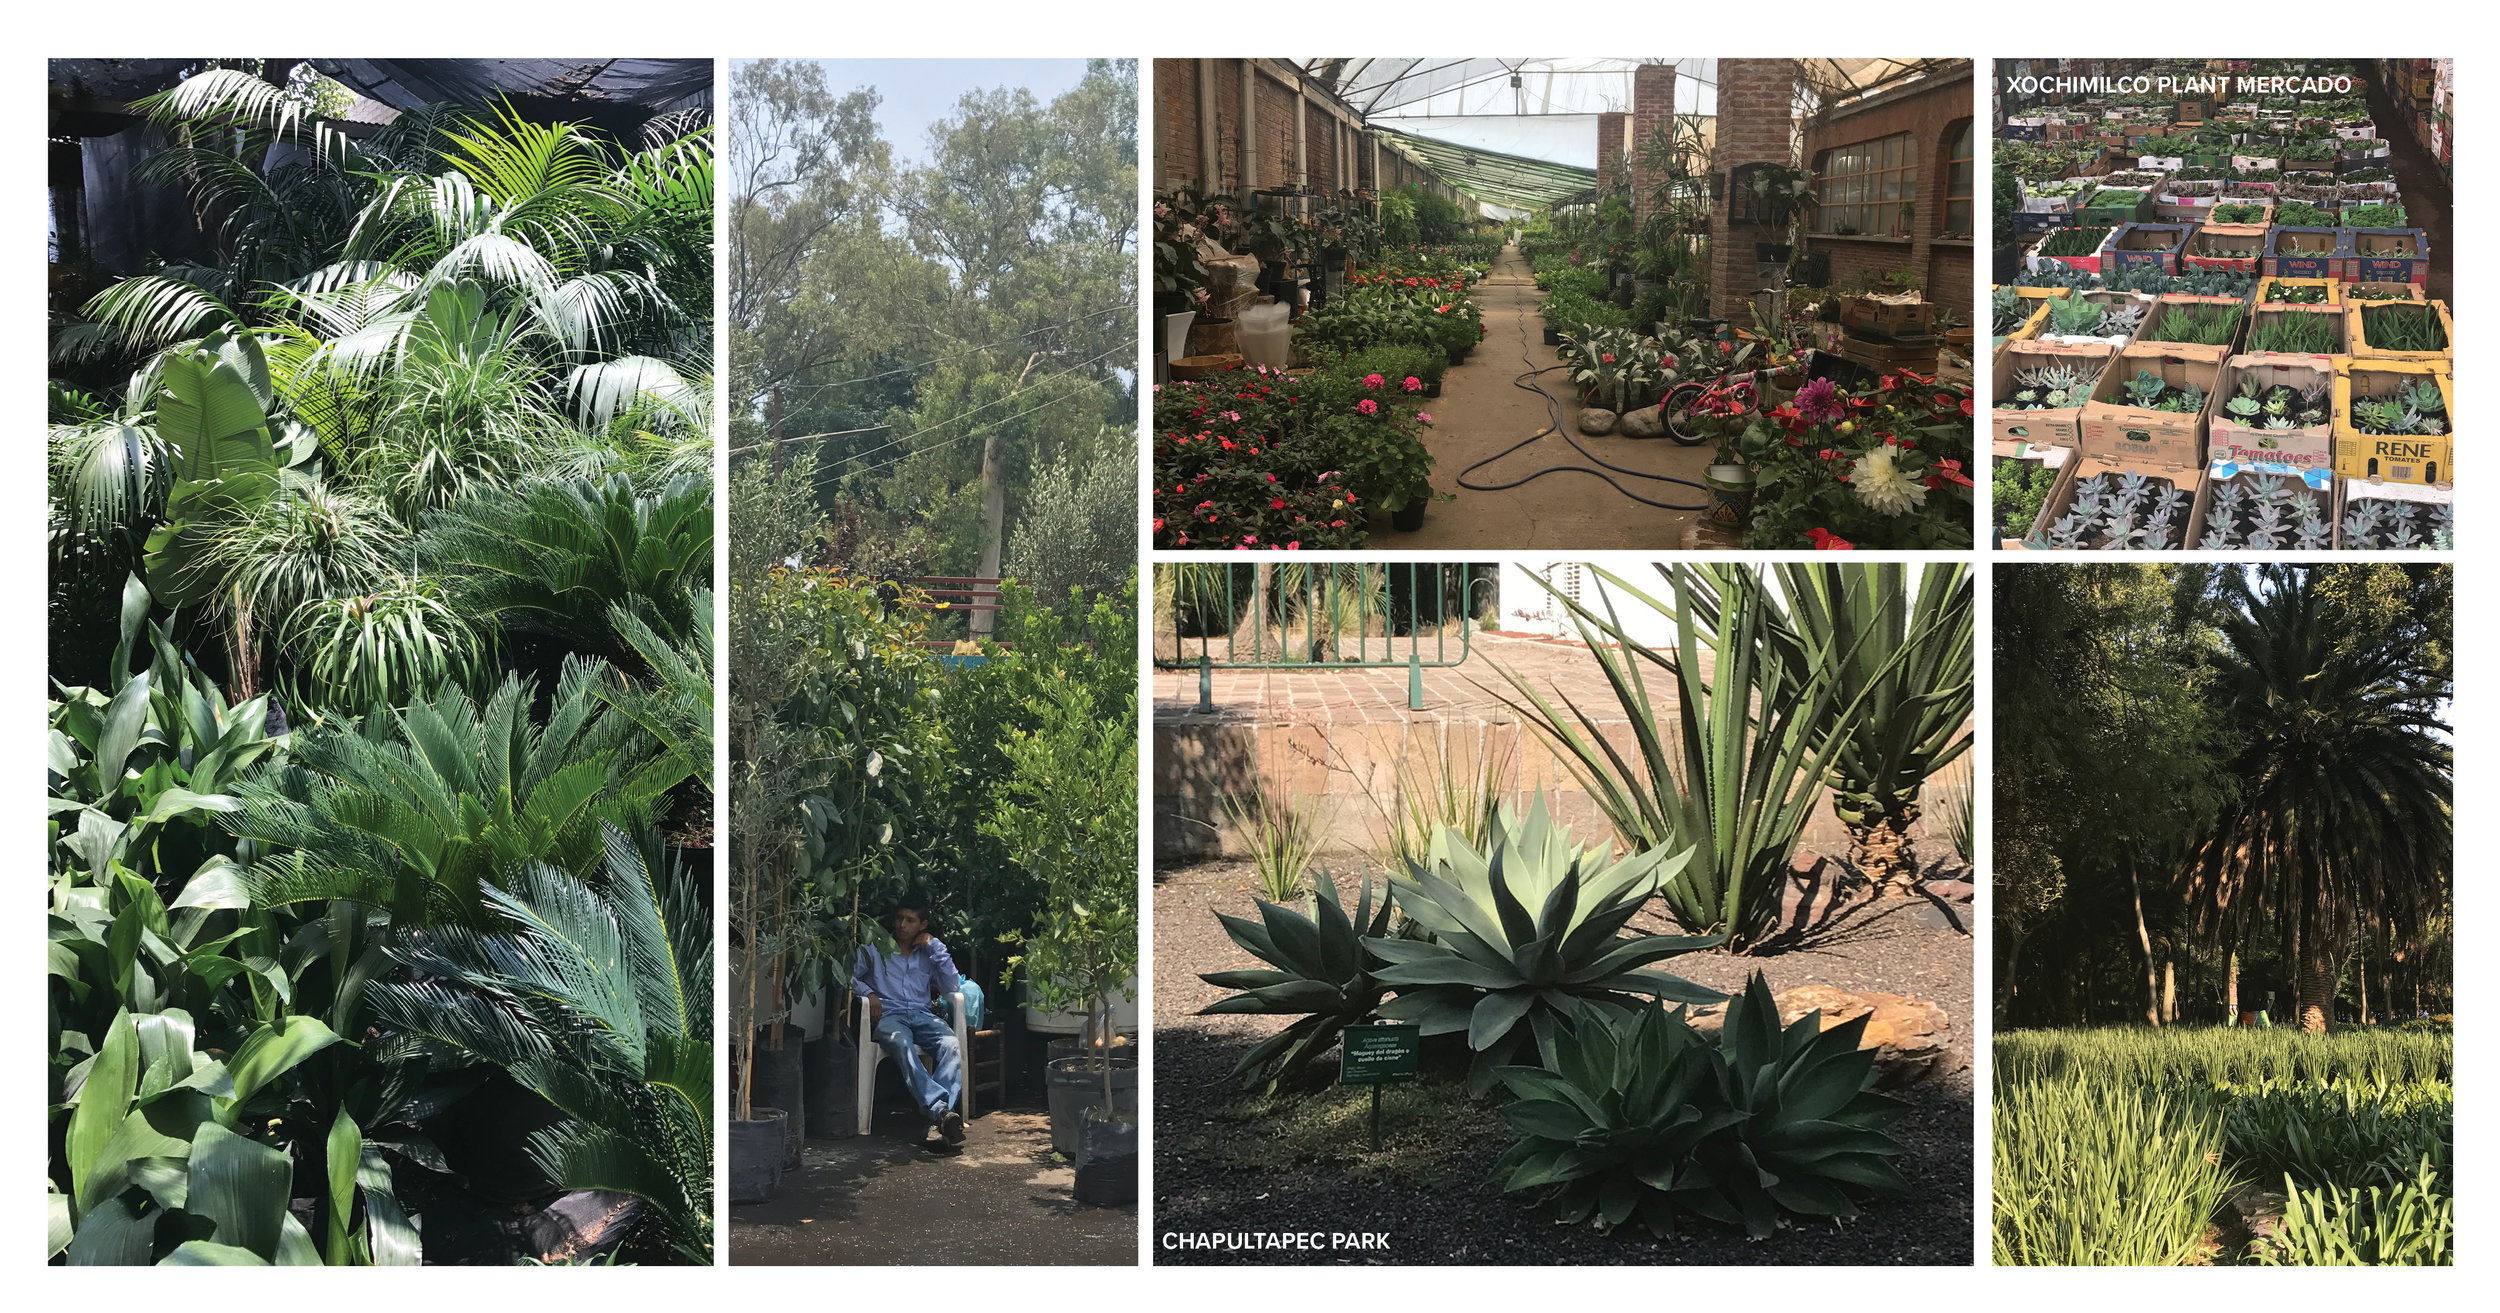  Visits to major public spaces, comparable developments, plant growers, and vast plant markets provided the basis for the ‘horizontal’ plant palette. Documentation of plants in context as well as a comprehensive look at local availability with the co